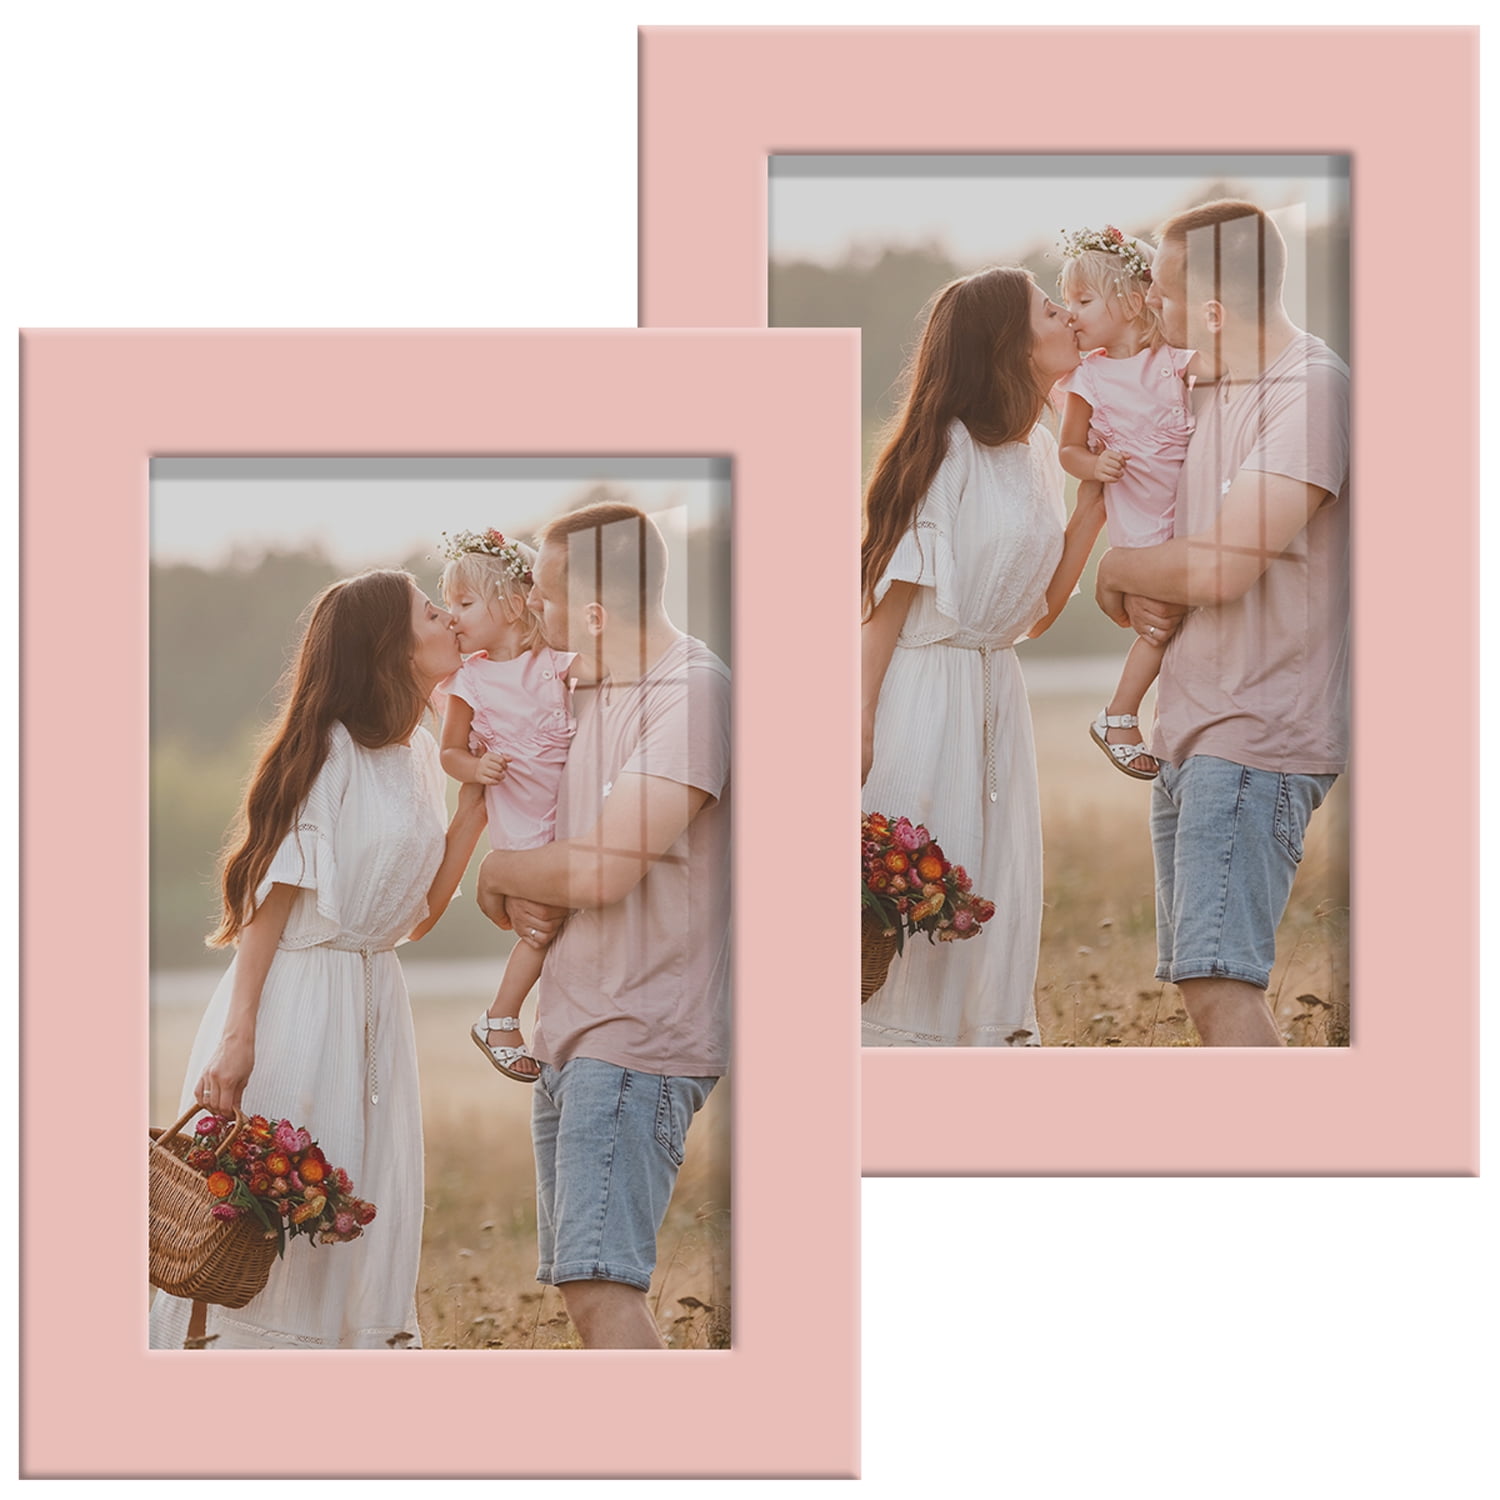 Wexford Home Textured 3.5 in. x 5 in. Pink Picture Frame (Set of 6) WF106A-6  - The Home Depot